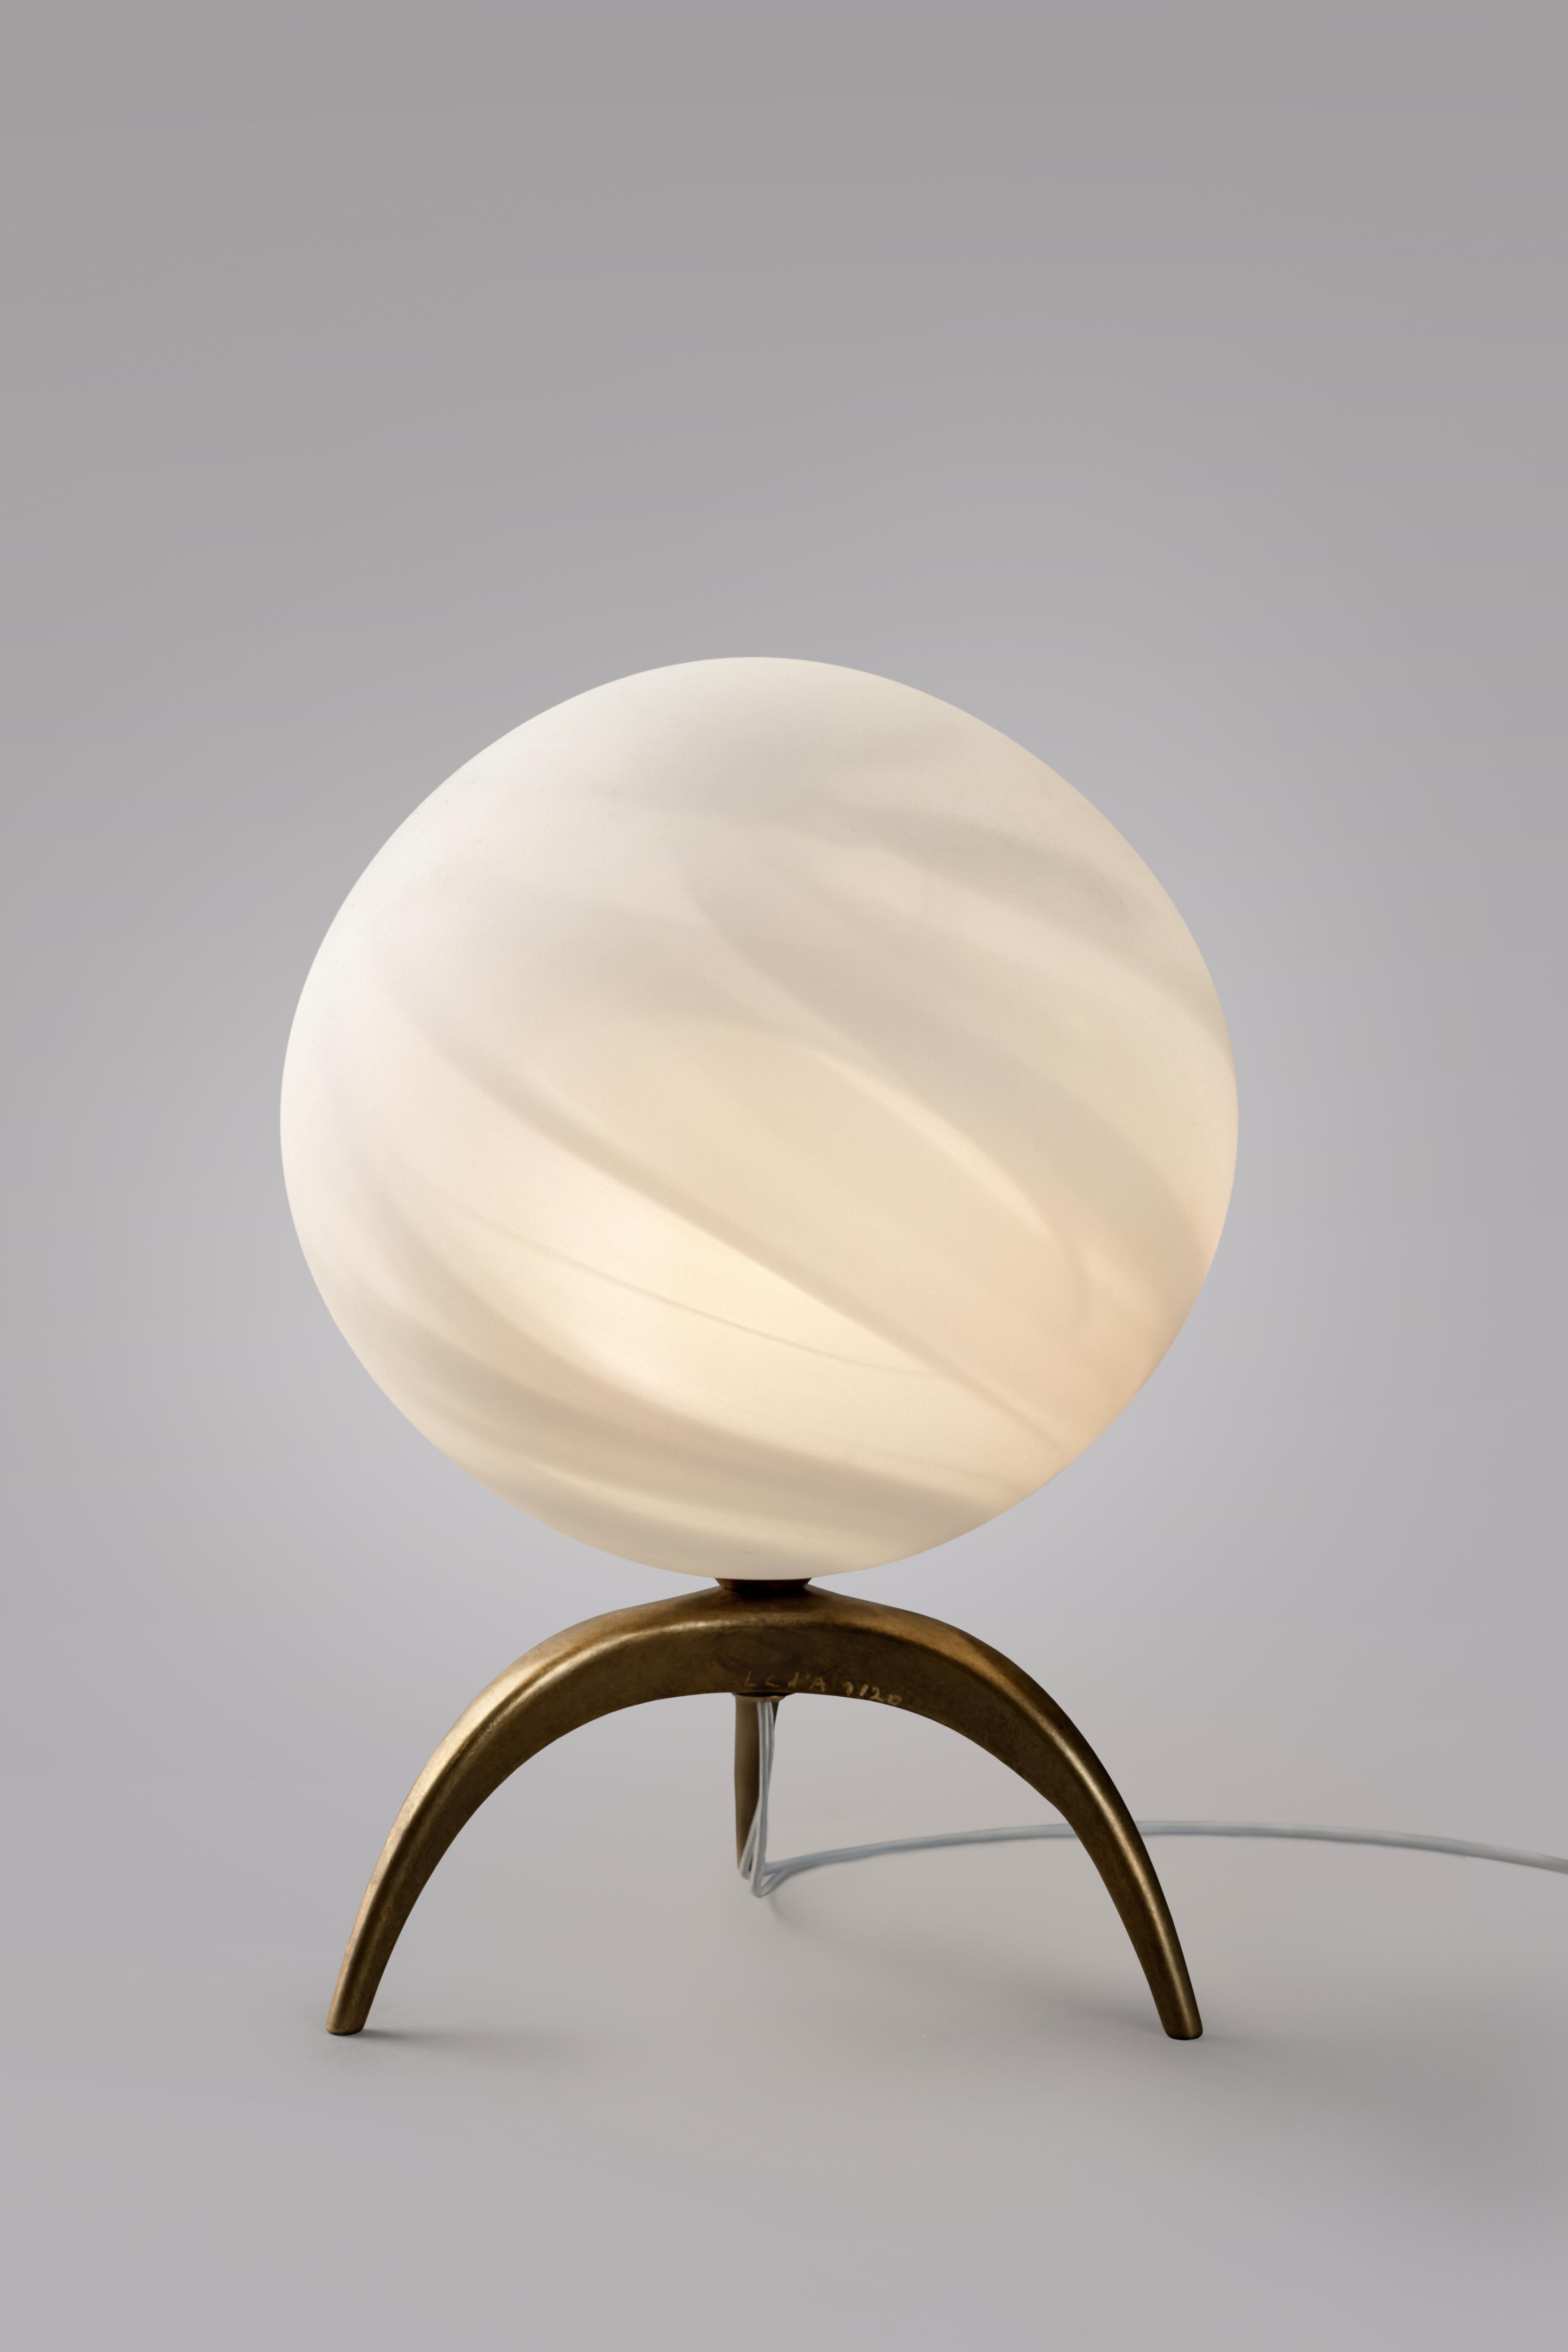 Modern Jupiter Blown Glass Table Lamp, Ludovic Clément d’Armont For Sale